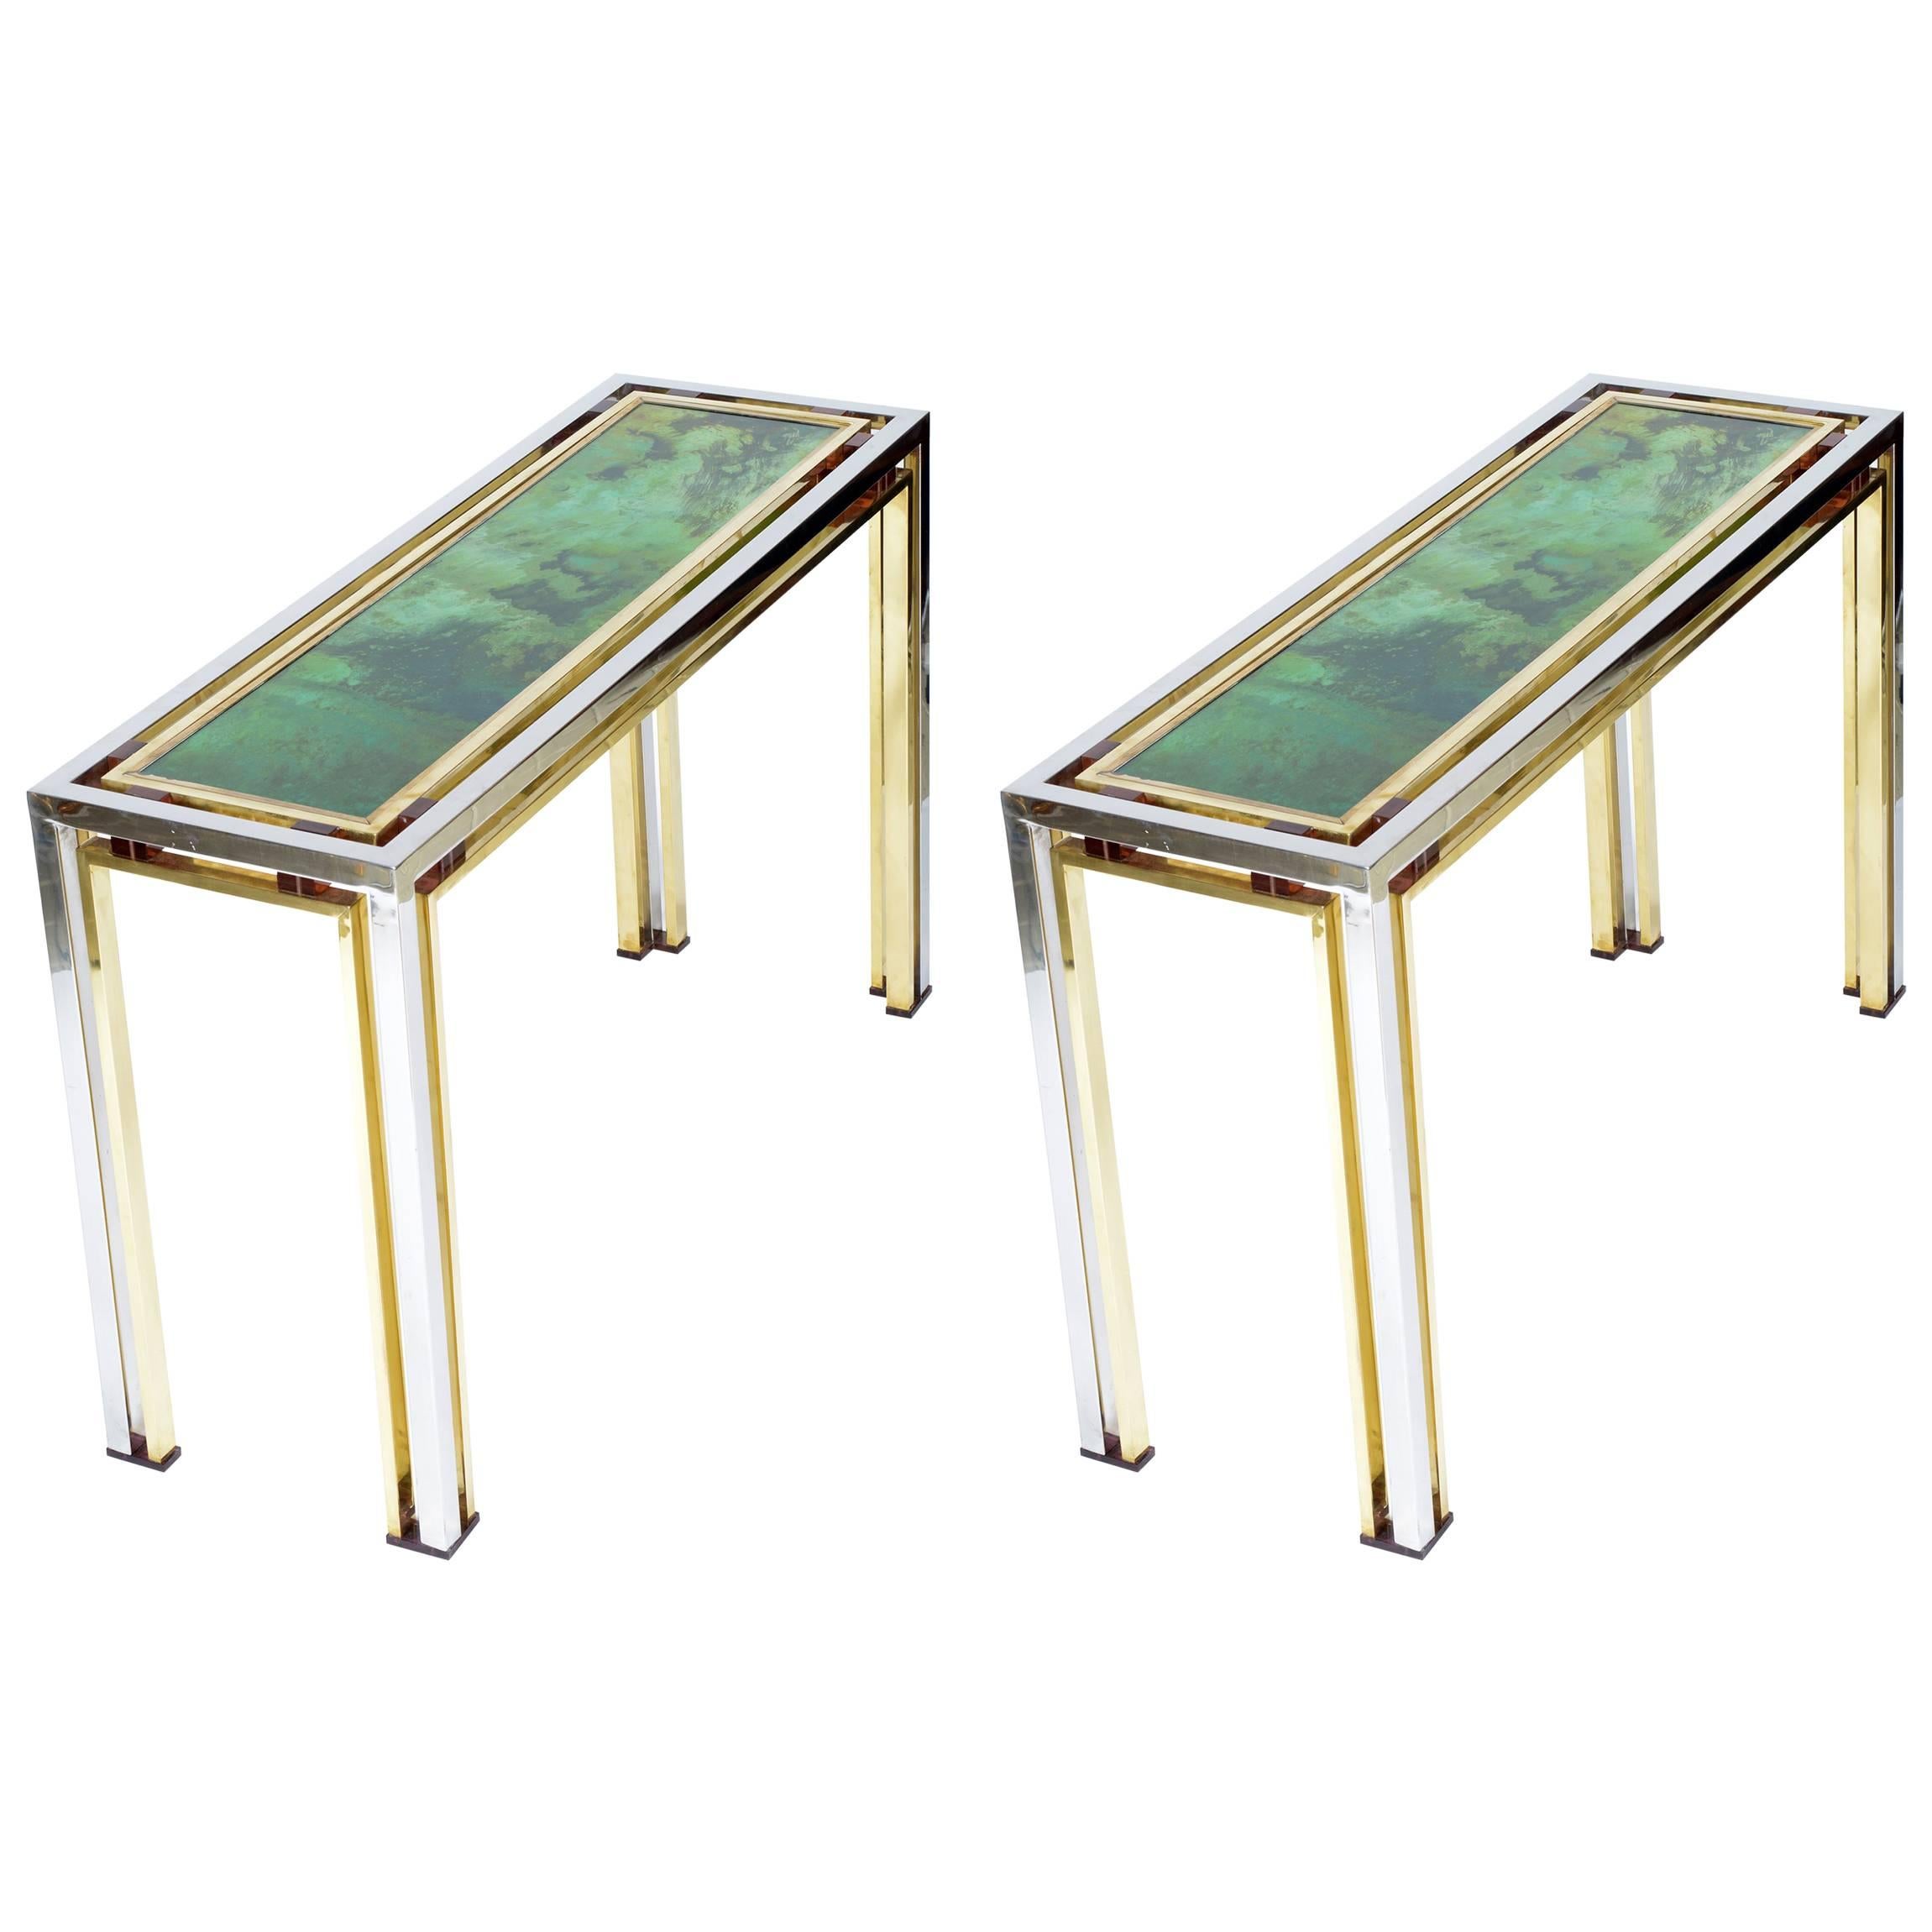 Chromed and brass structure with amber color Lucite details on the up corner and feet.
The top is a painted glass and after covered with gold leaf that create an abstract decoration.
This consoles are finished in all the side and can be put in the